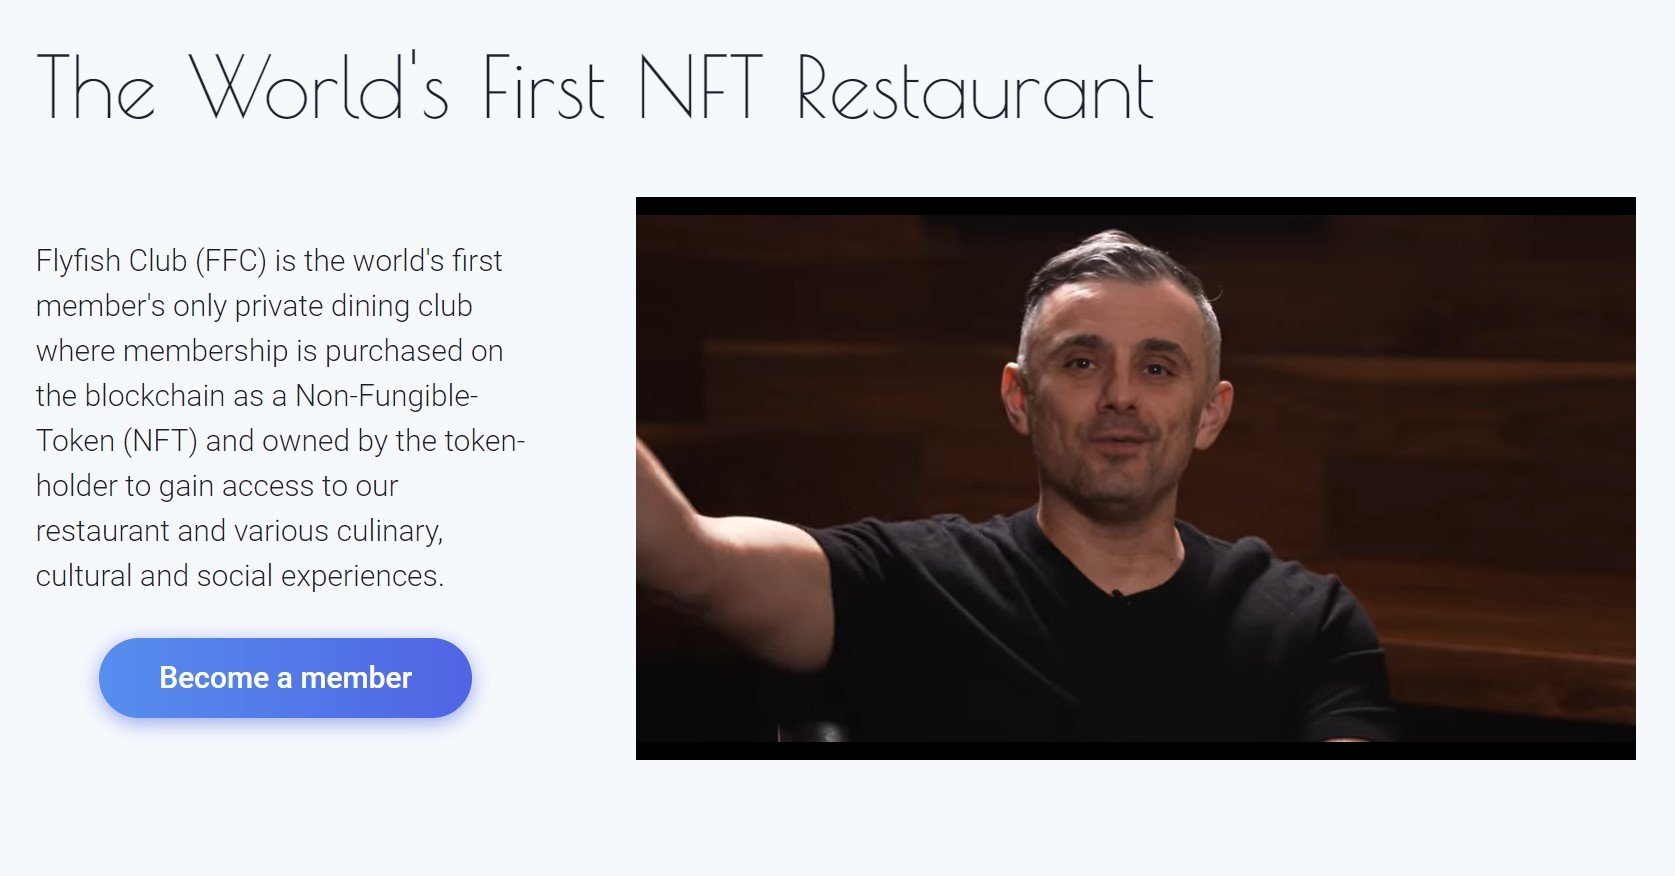 Screengrab from Flyfish Club NFT website featuring co-founder Gary Vee